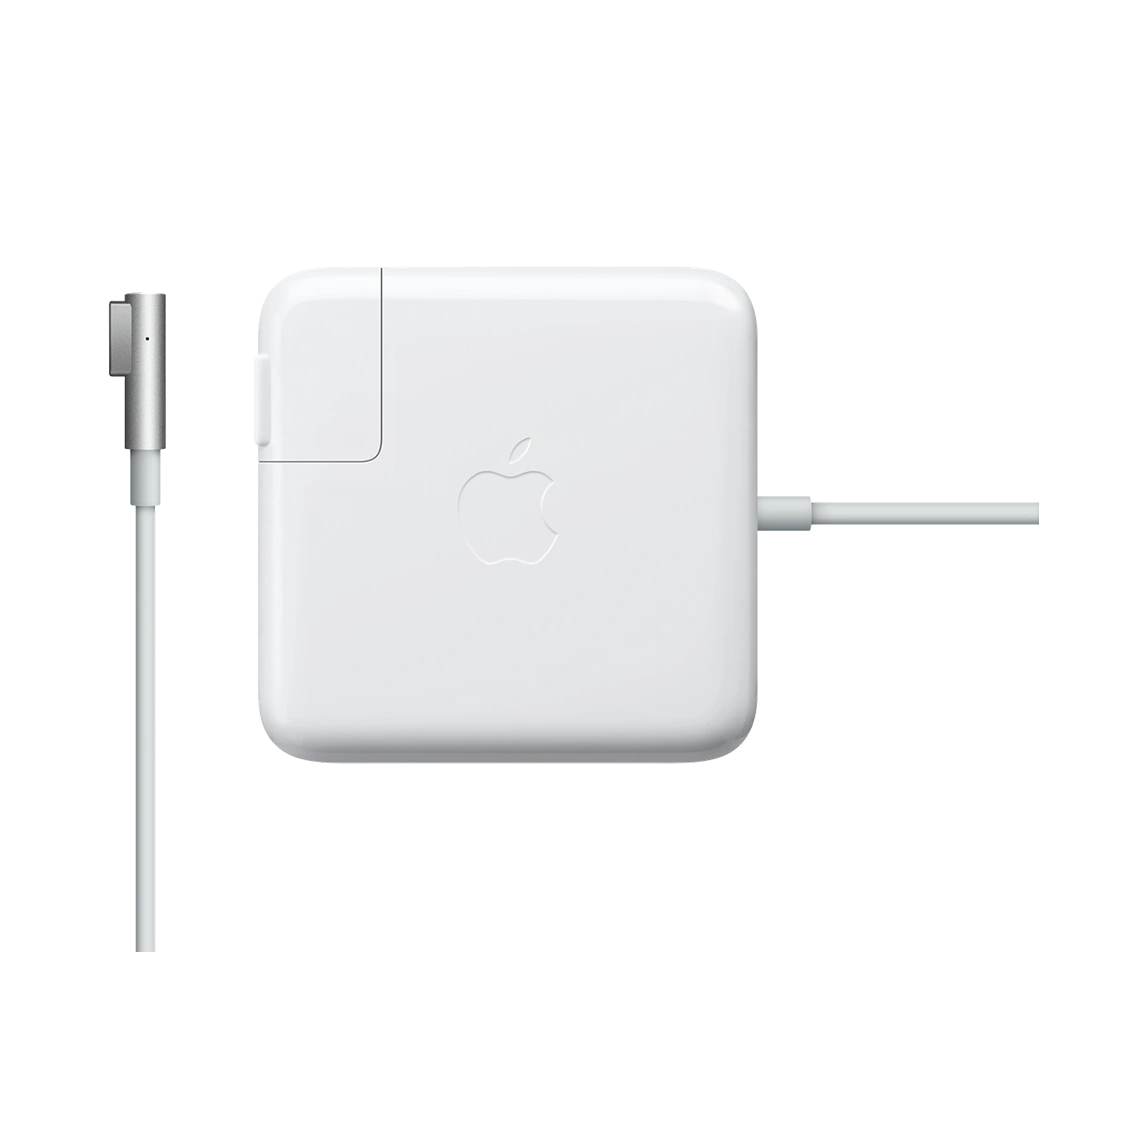 apple-85w-magsafe-power-adapter